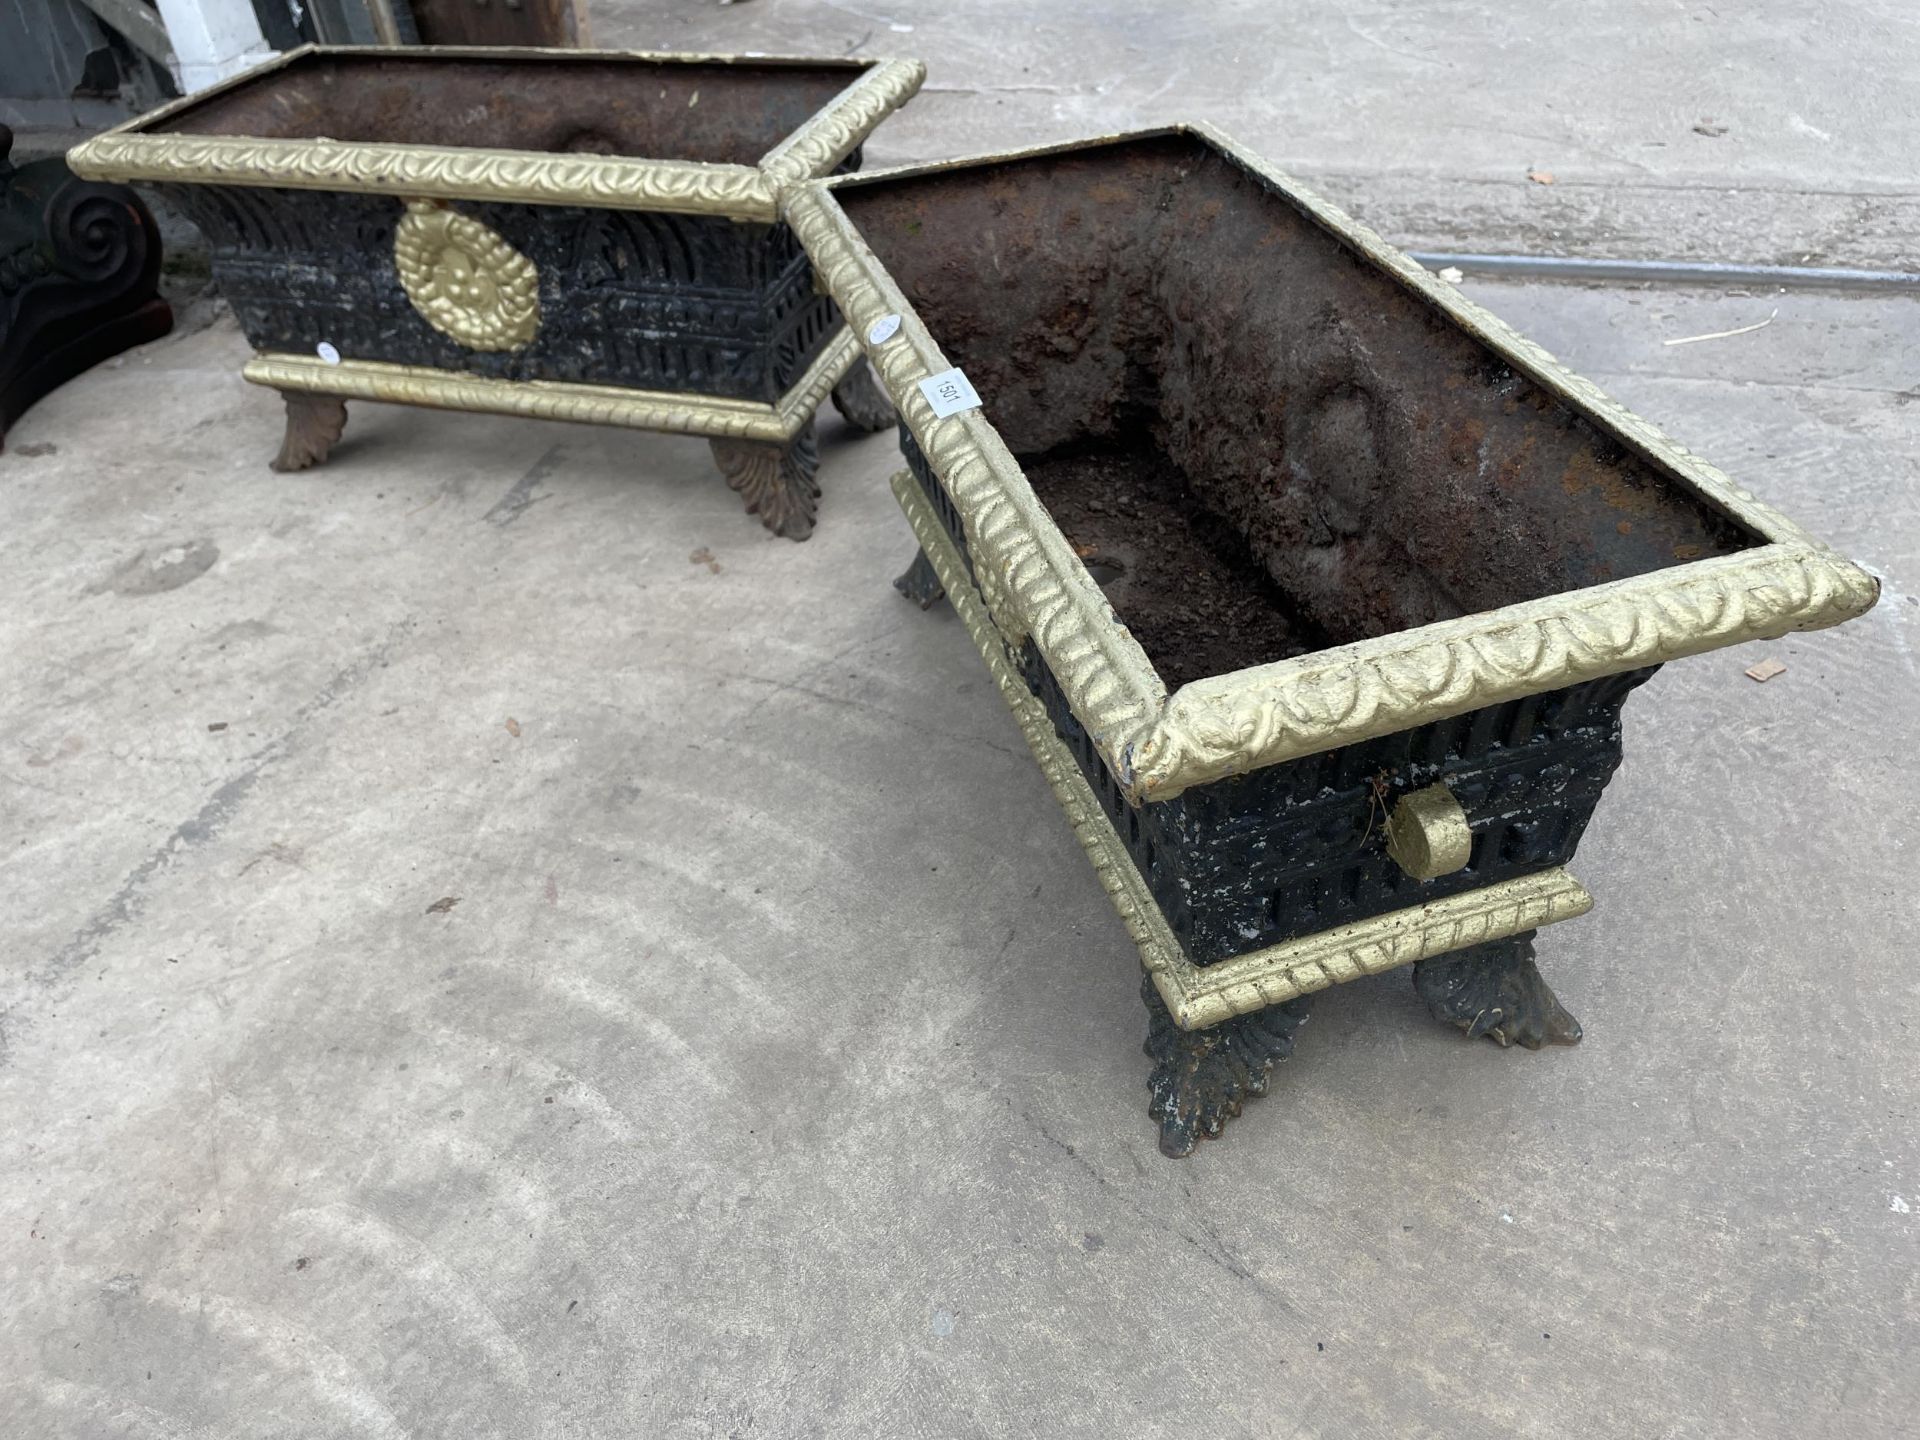 A PAIR OF VINTAGE DECORATIVE BLACK AND GOLD PAINTED CAST IRON TROUGH PLANTERS - Image 2 of 7